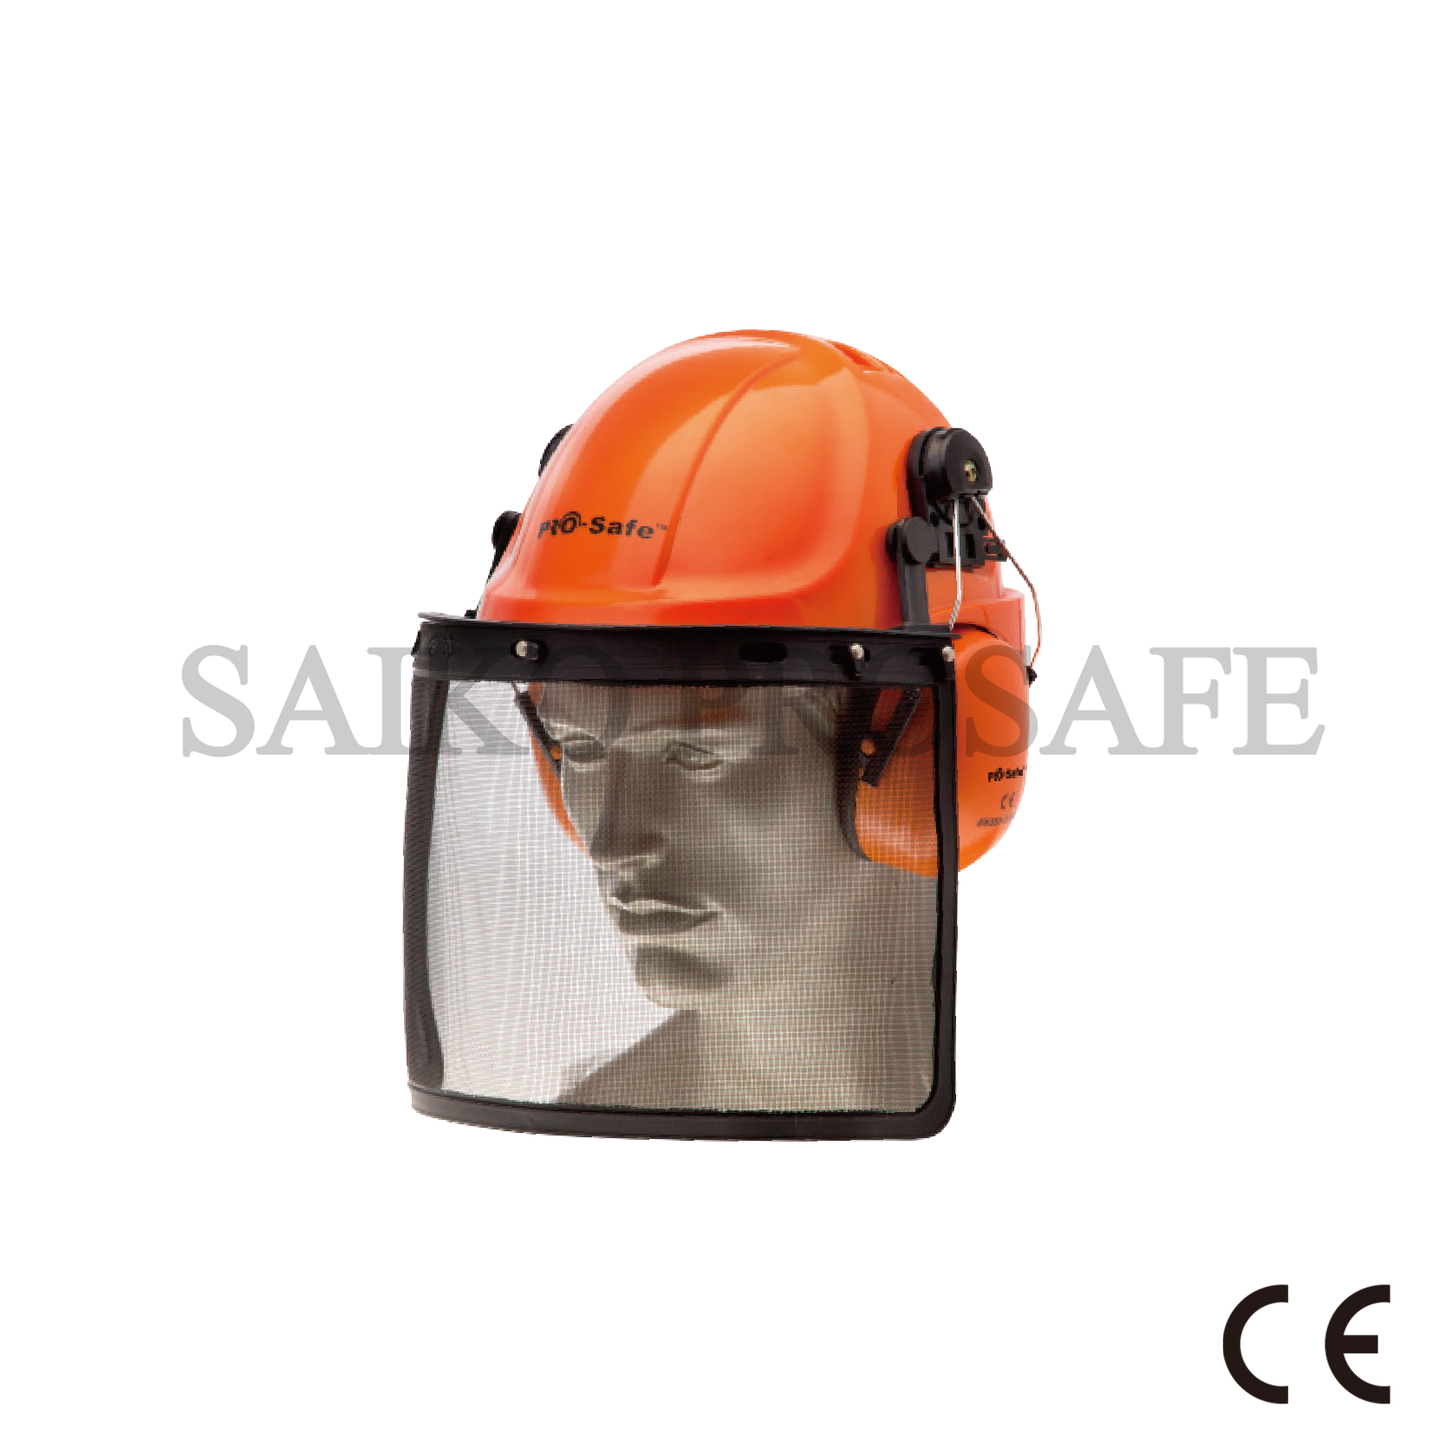 High quality Safety Helmet with Face Shield -  mesh visor and earmuffs- KM1504102